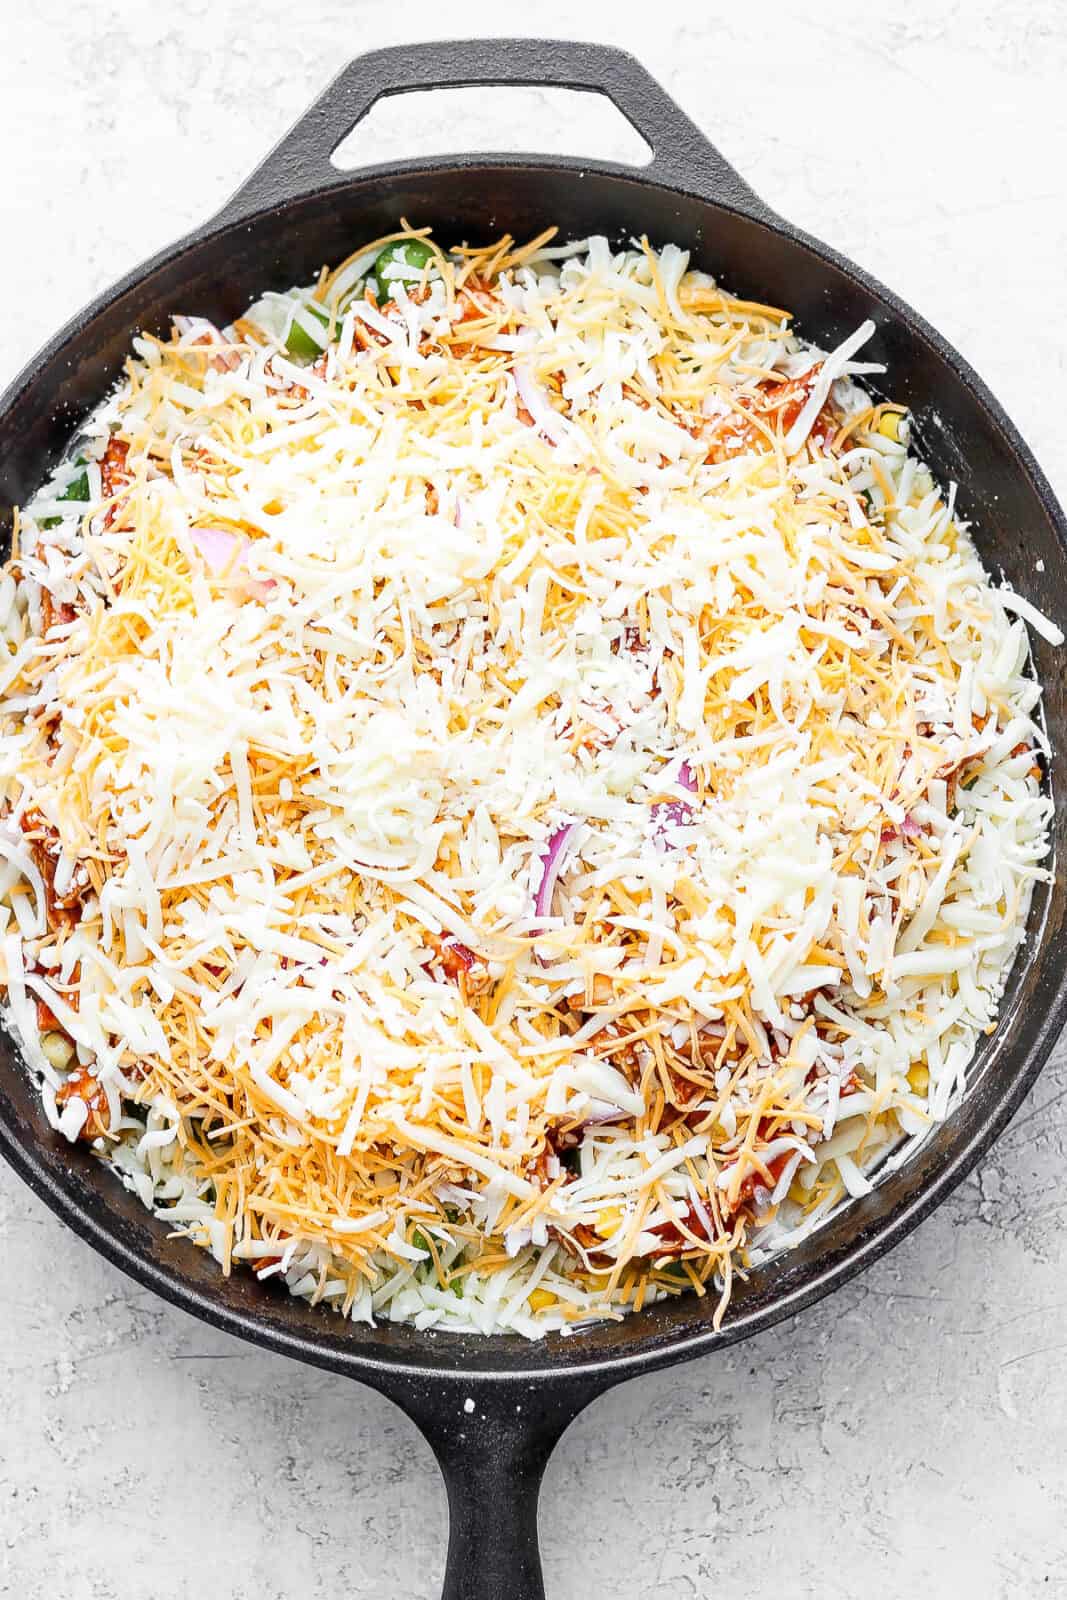 Shredded cheese added on top of everything.